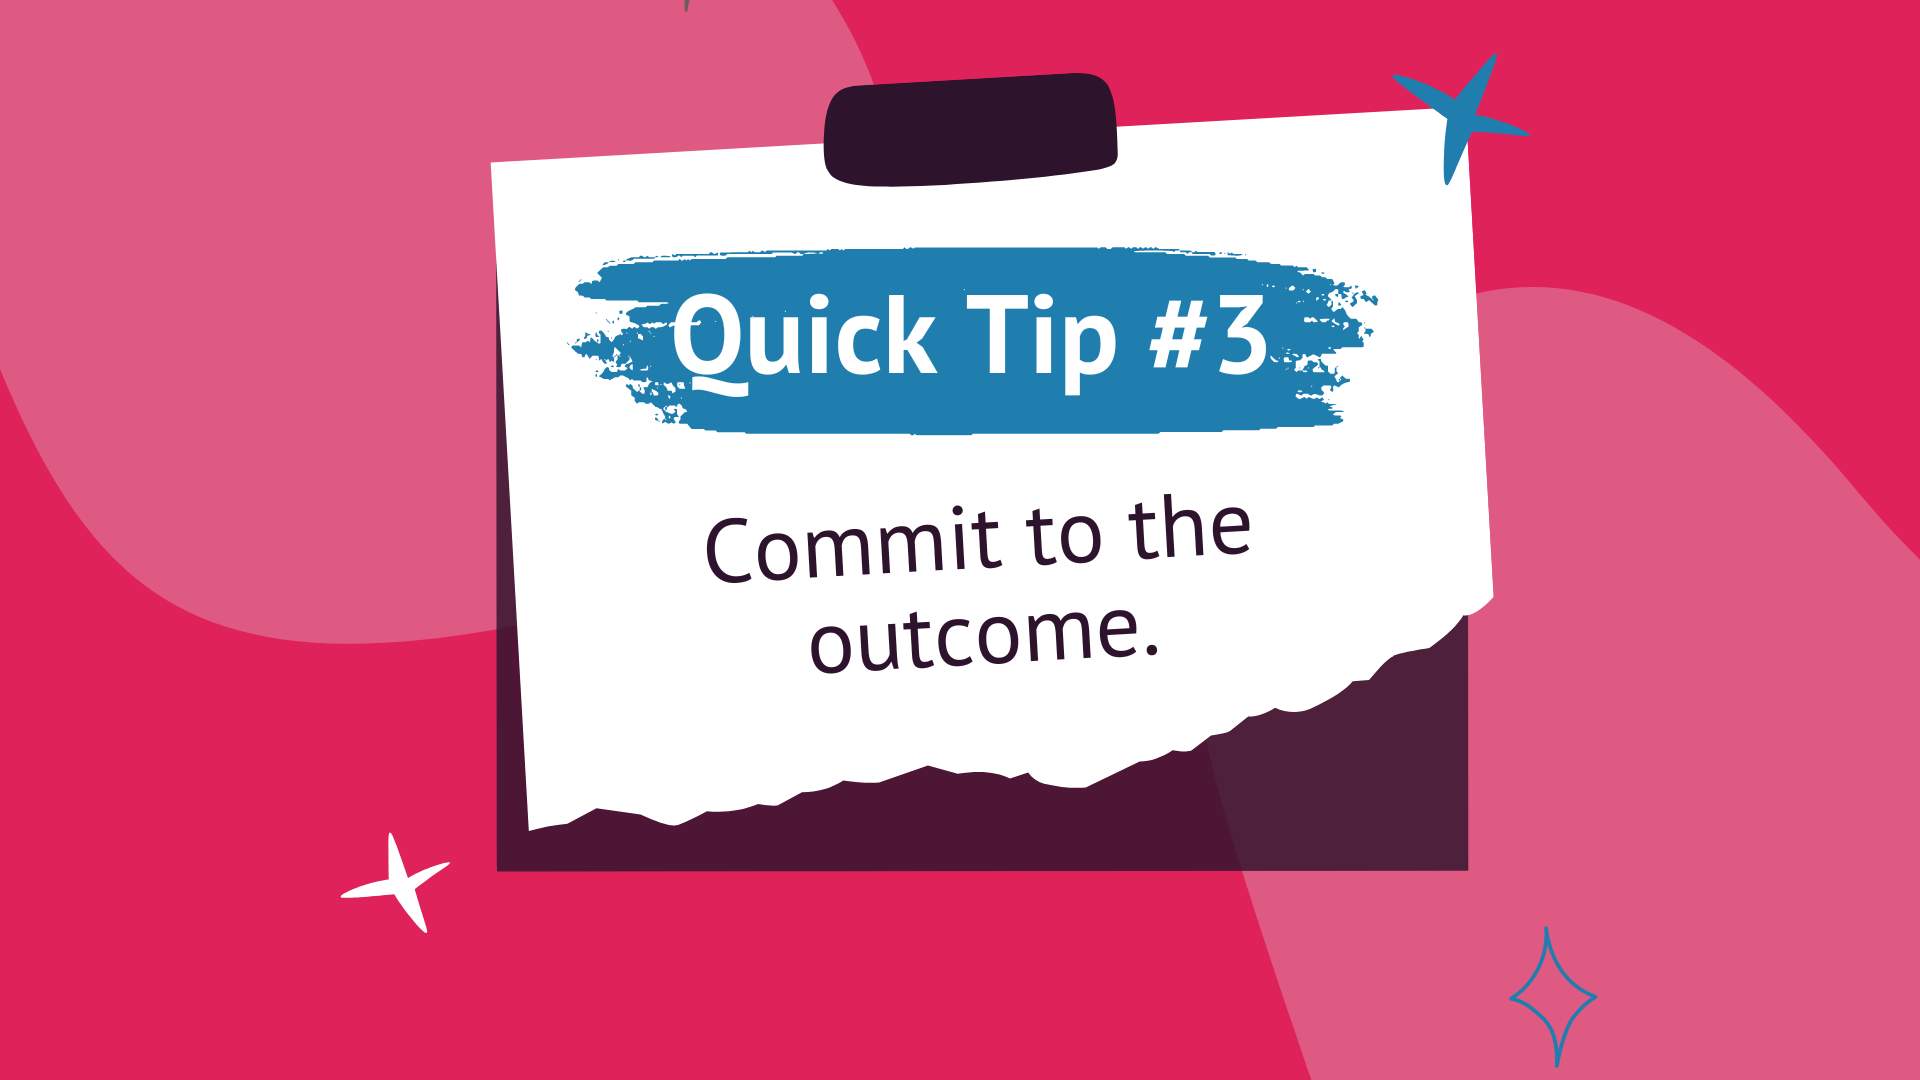 Quick tip #3 Commit to the outcome.